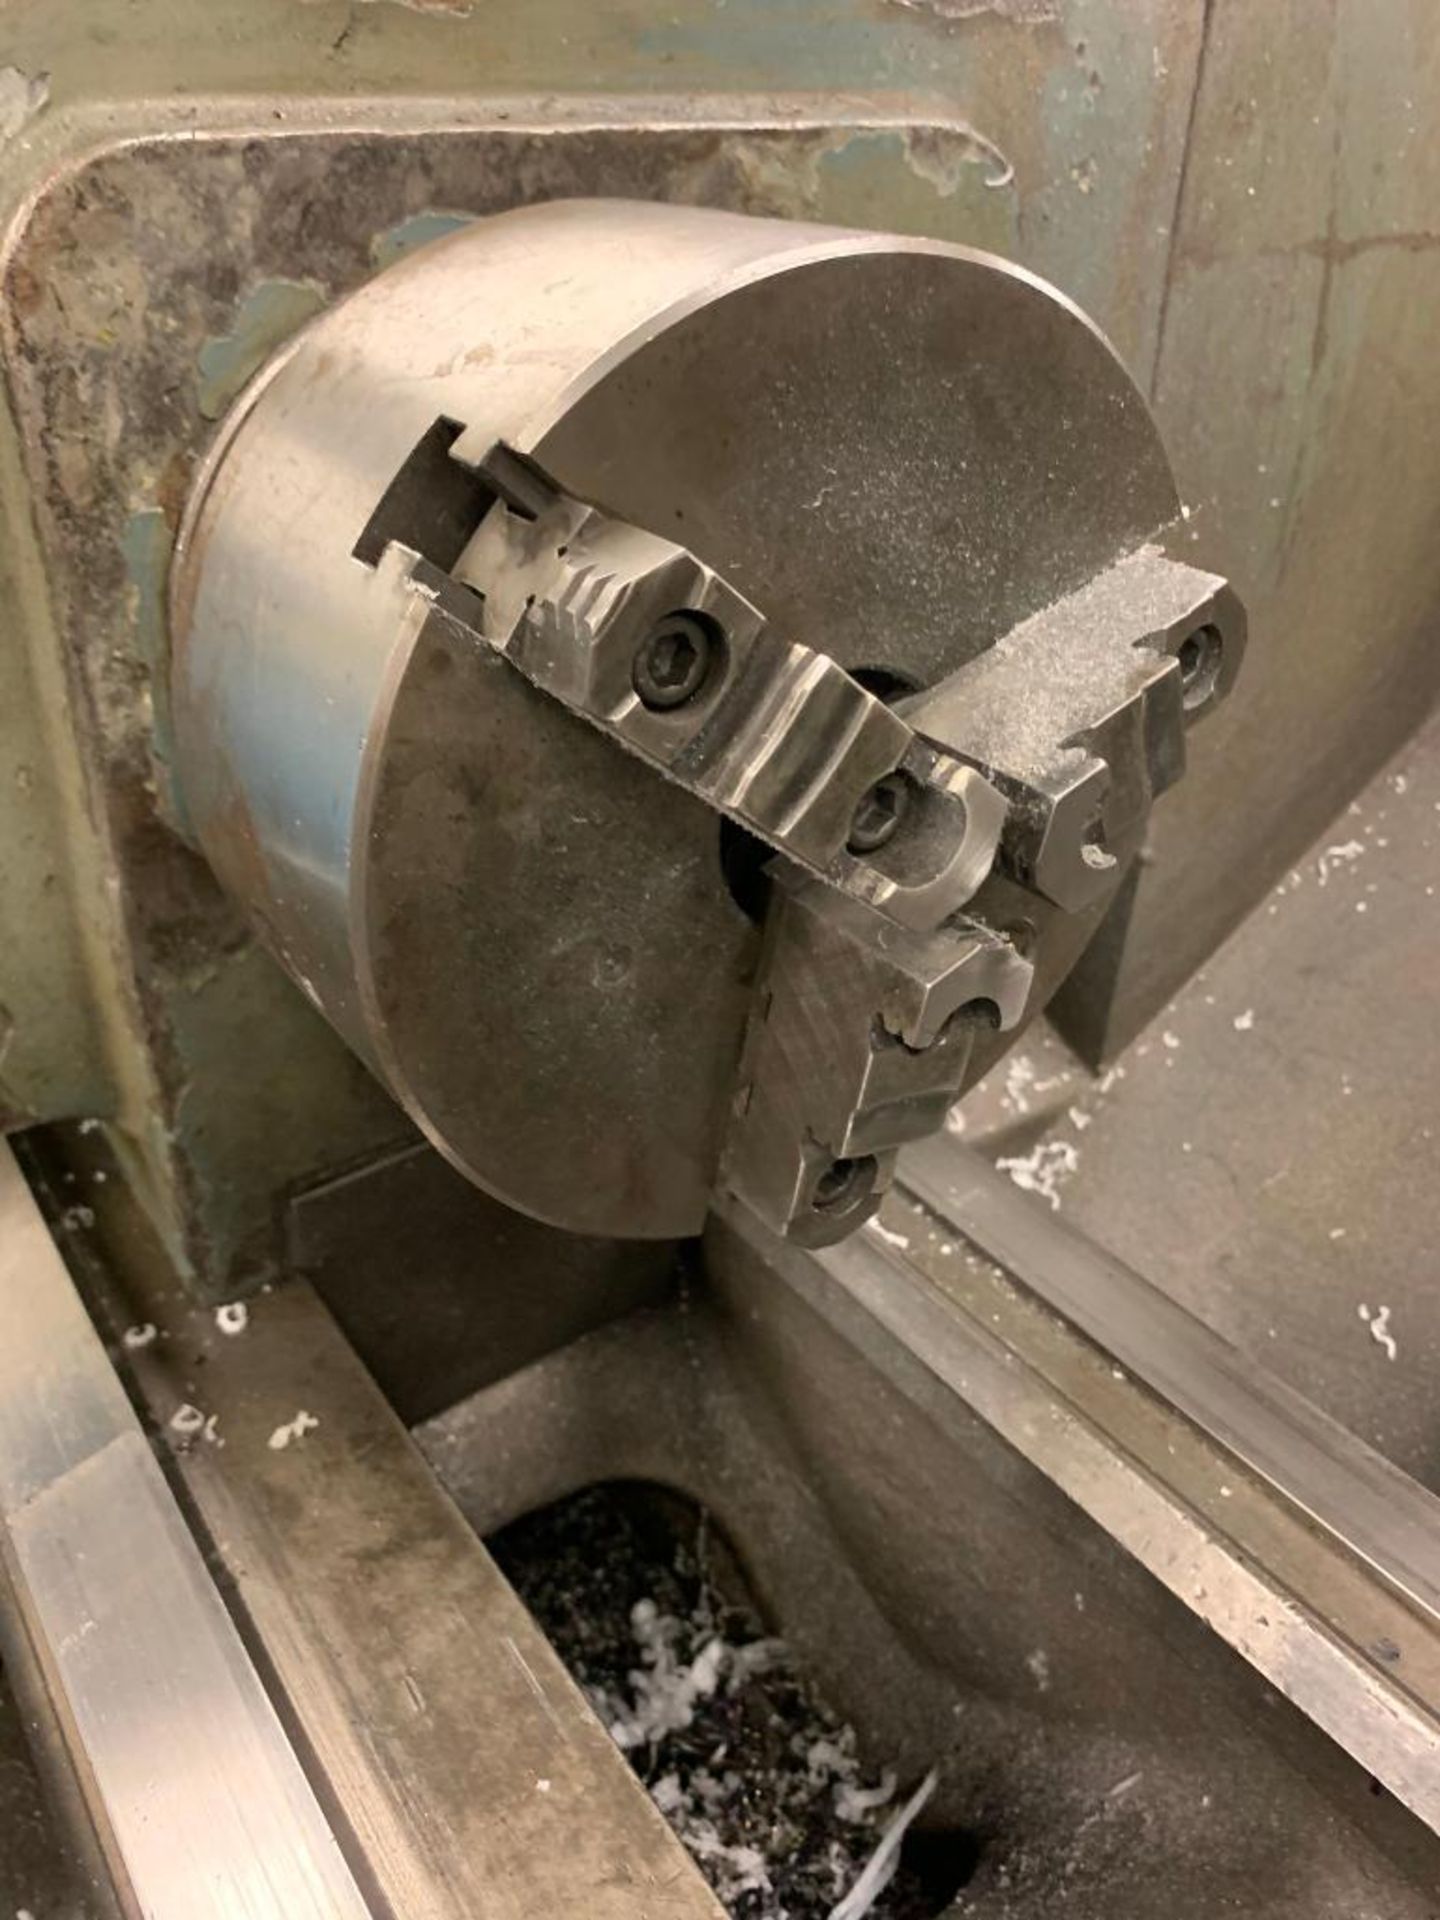 LeBlond Regal Engine Lathe, 8" 3-Jaw Chuck, Tailstock w/ Drill Chuck, Tailstock, 4" Steady Rest - Image 6 of 8